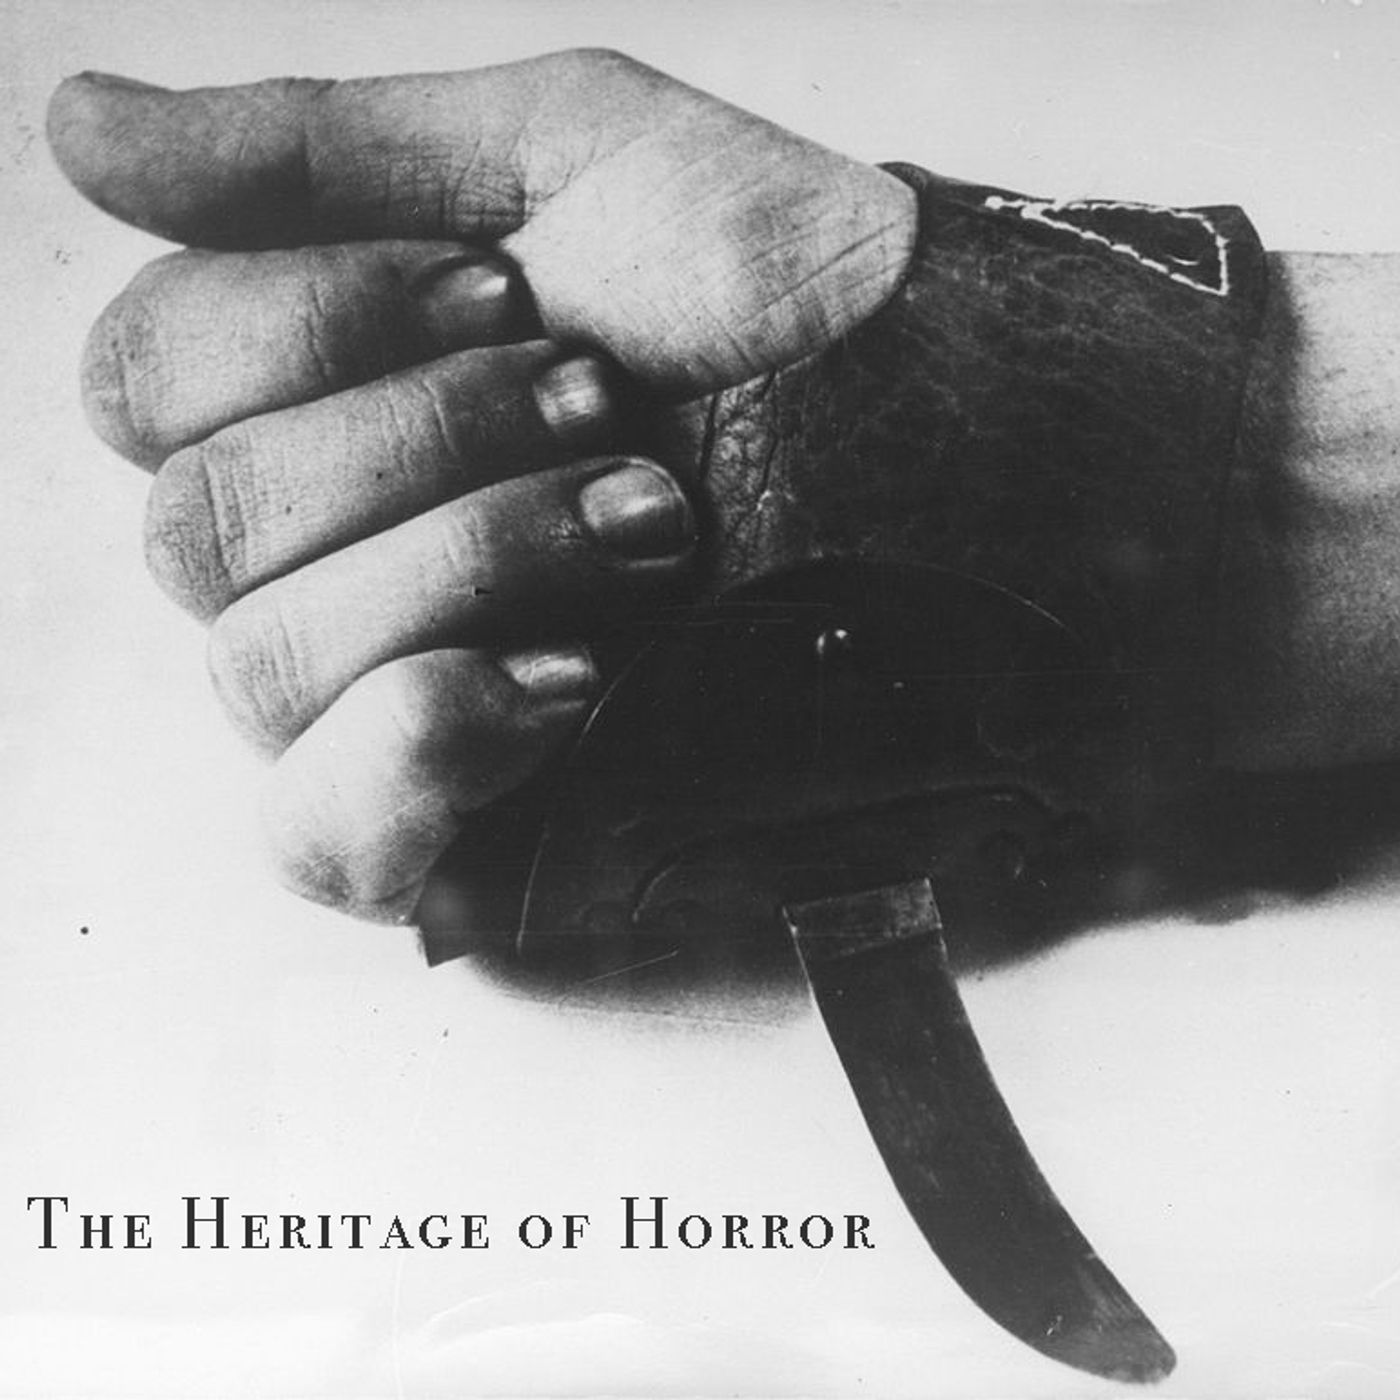 The Muslim Nazis: The Heritage of Horror